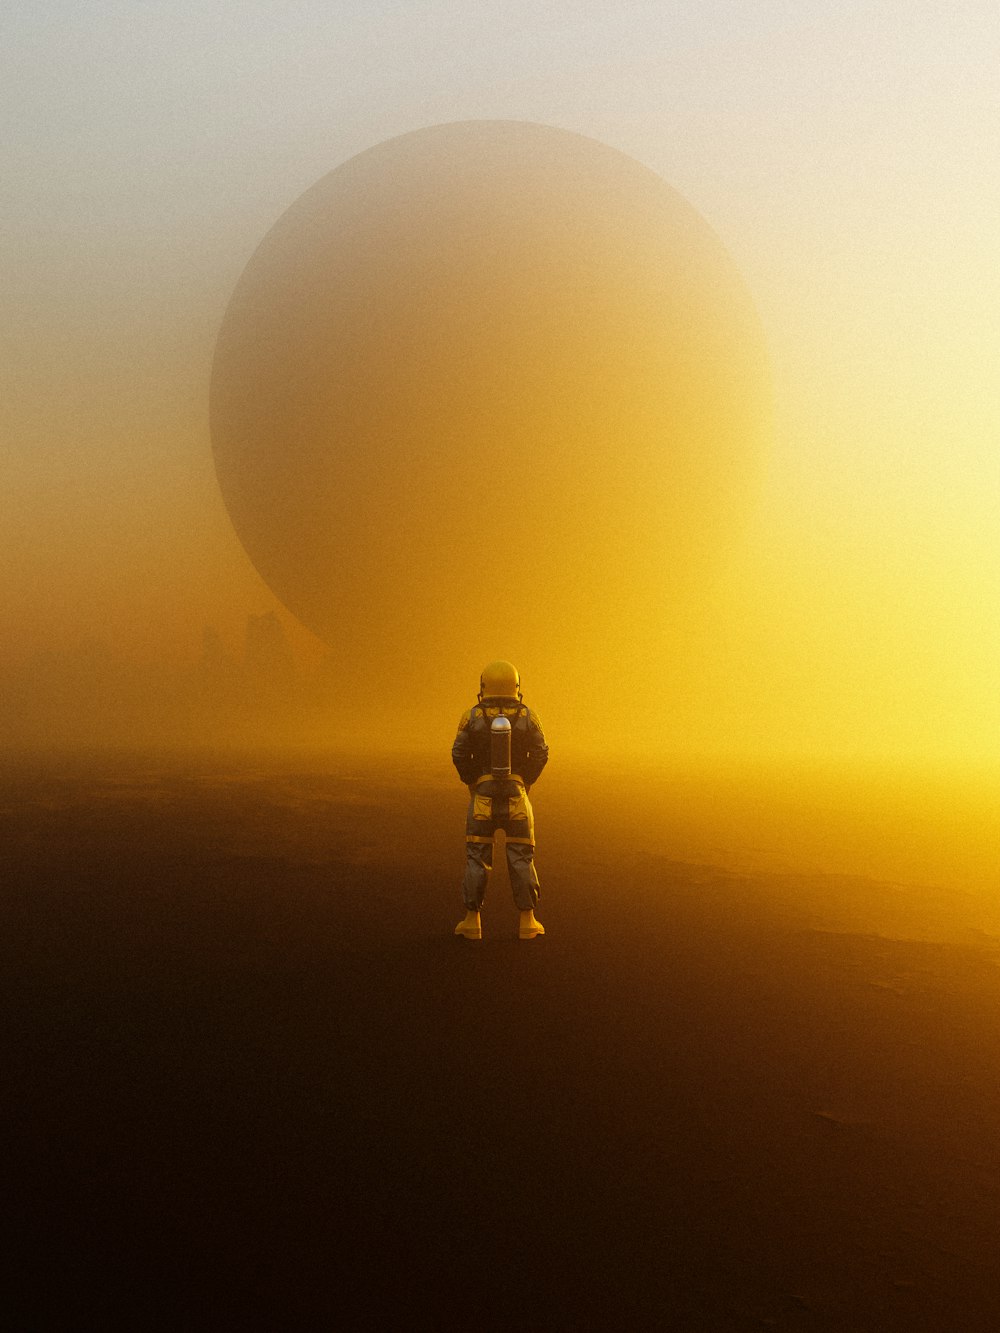 a person standing in front of a large moon